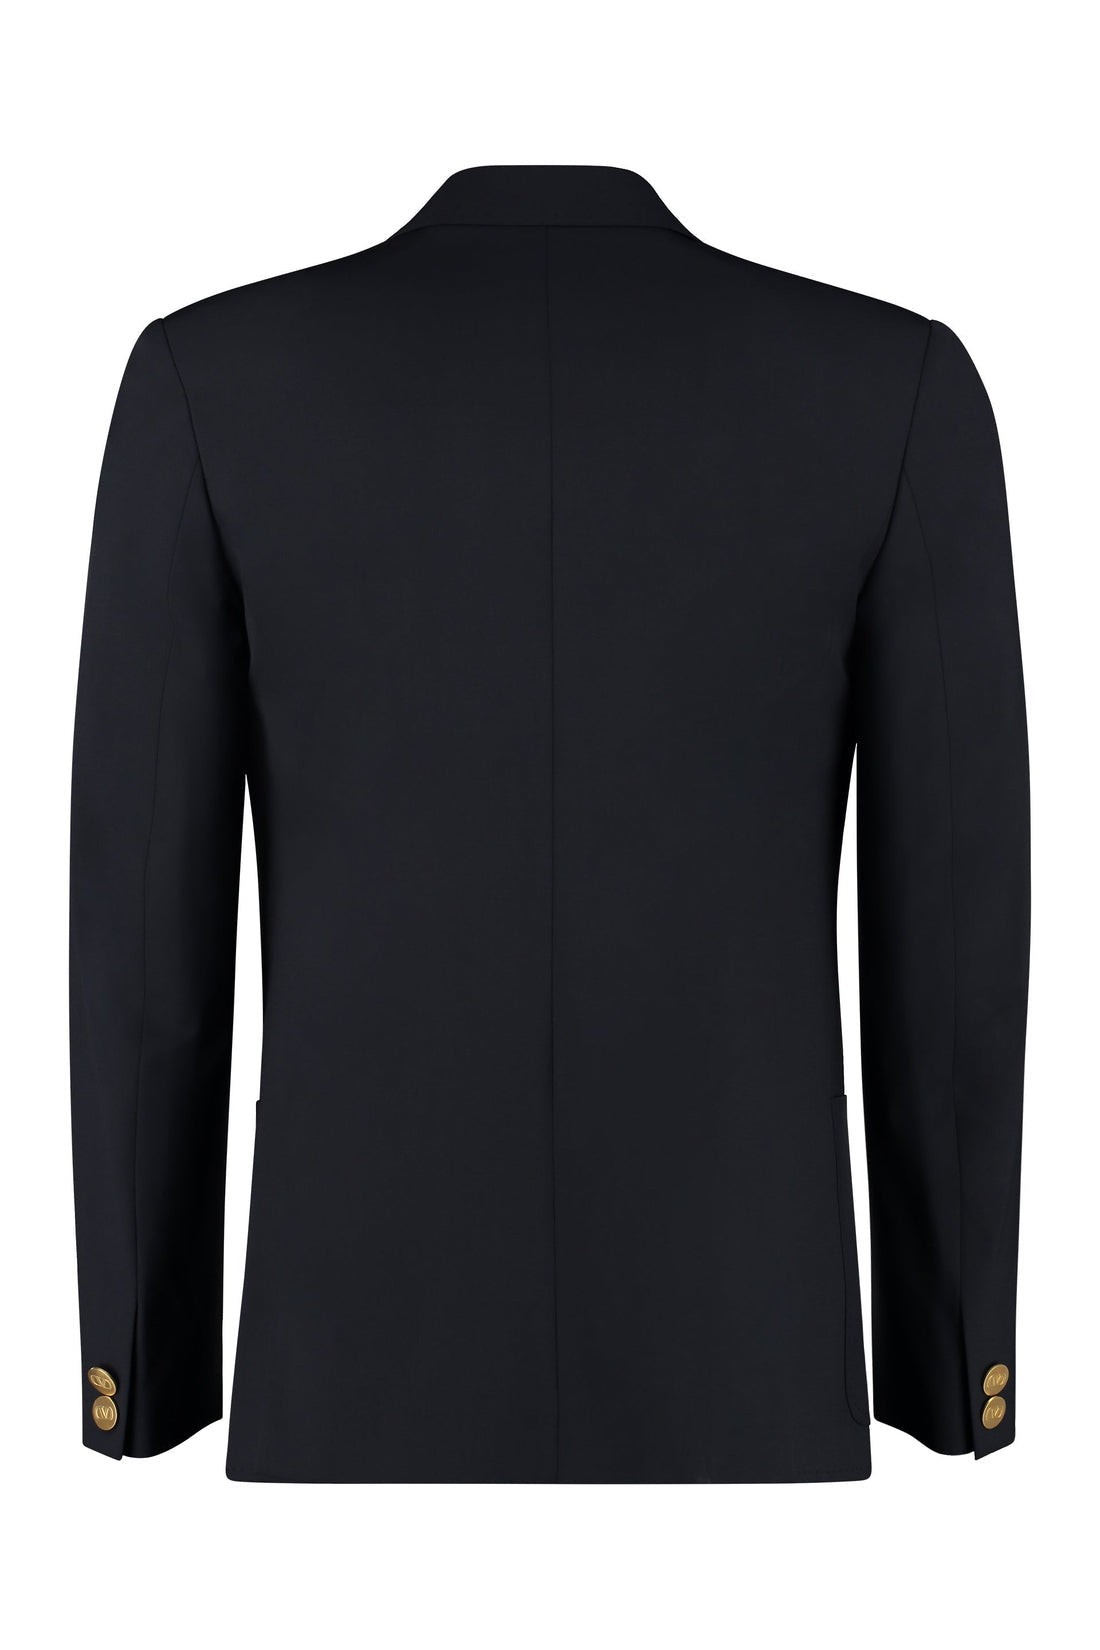 Valentino-OUTLET-SALE-Wool blend double-breasted jacket-ARCHIVIST